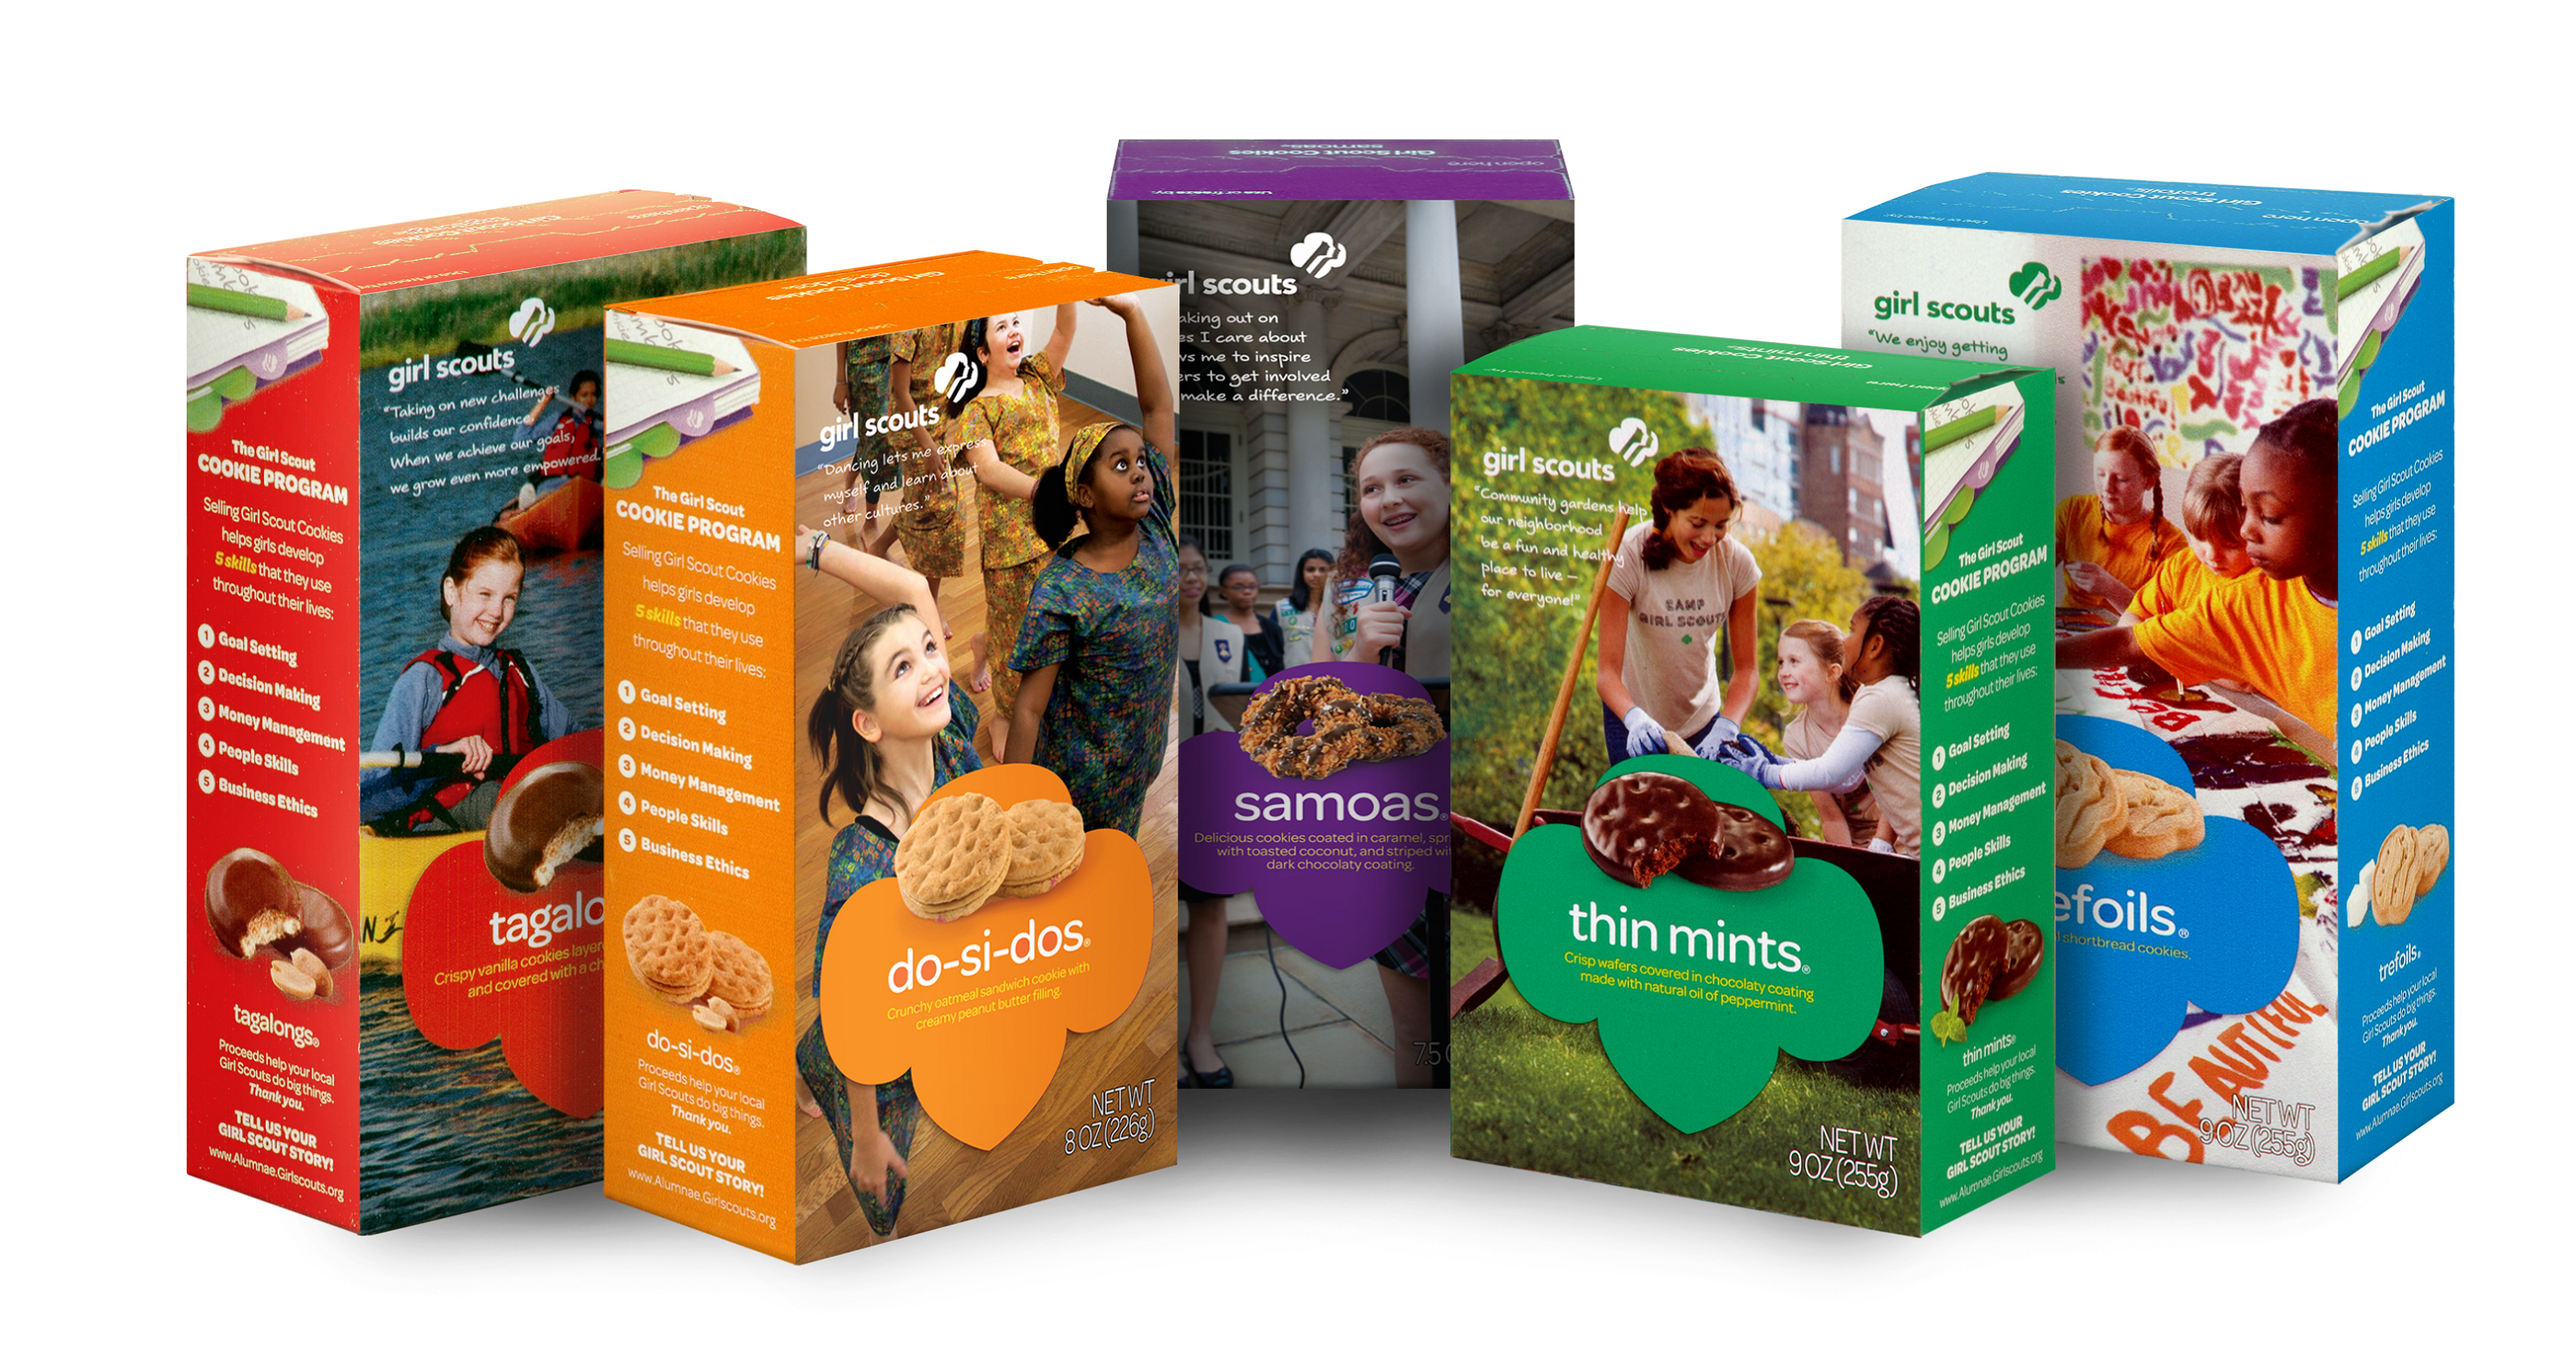 Girl Scout Cookie Weekend celebrates iconic program